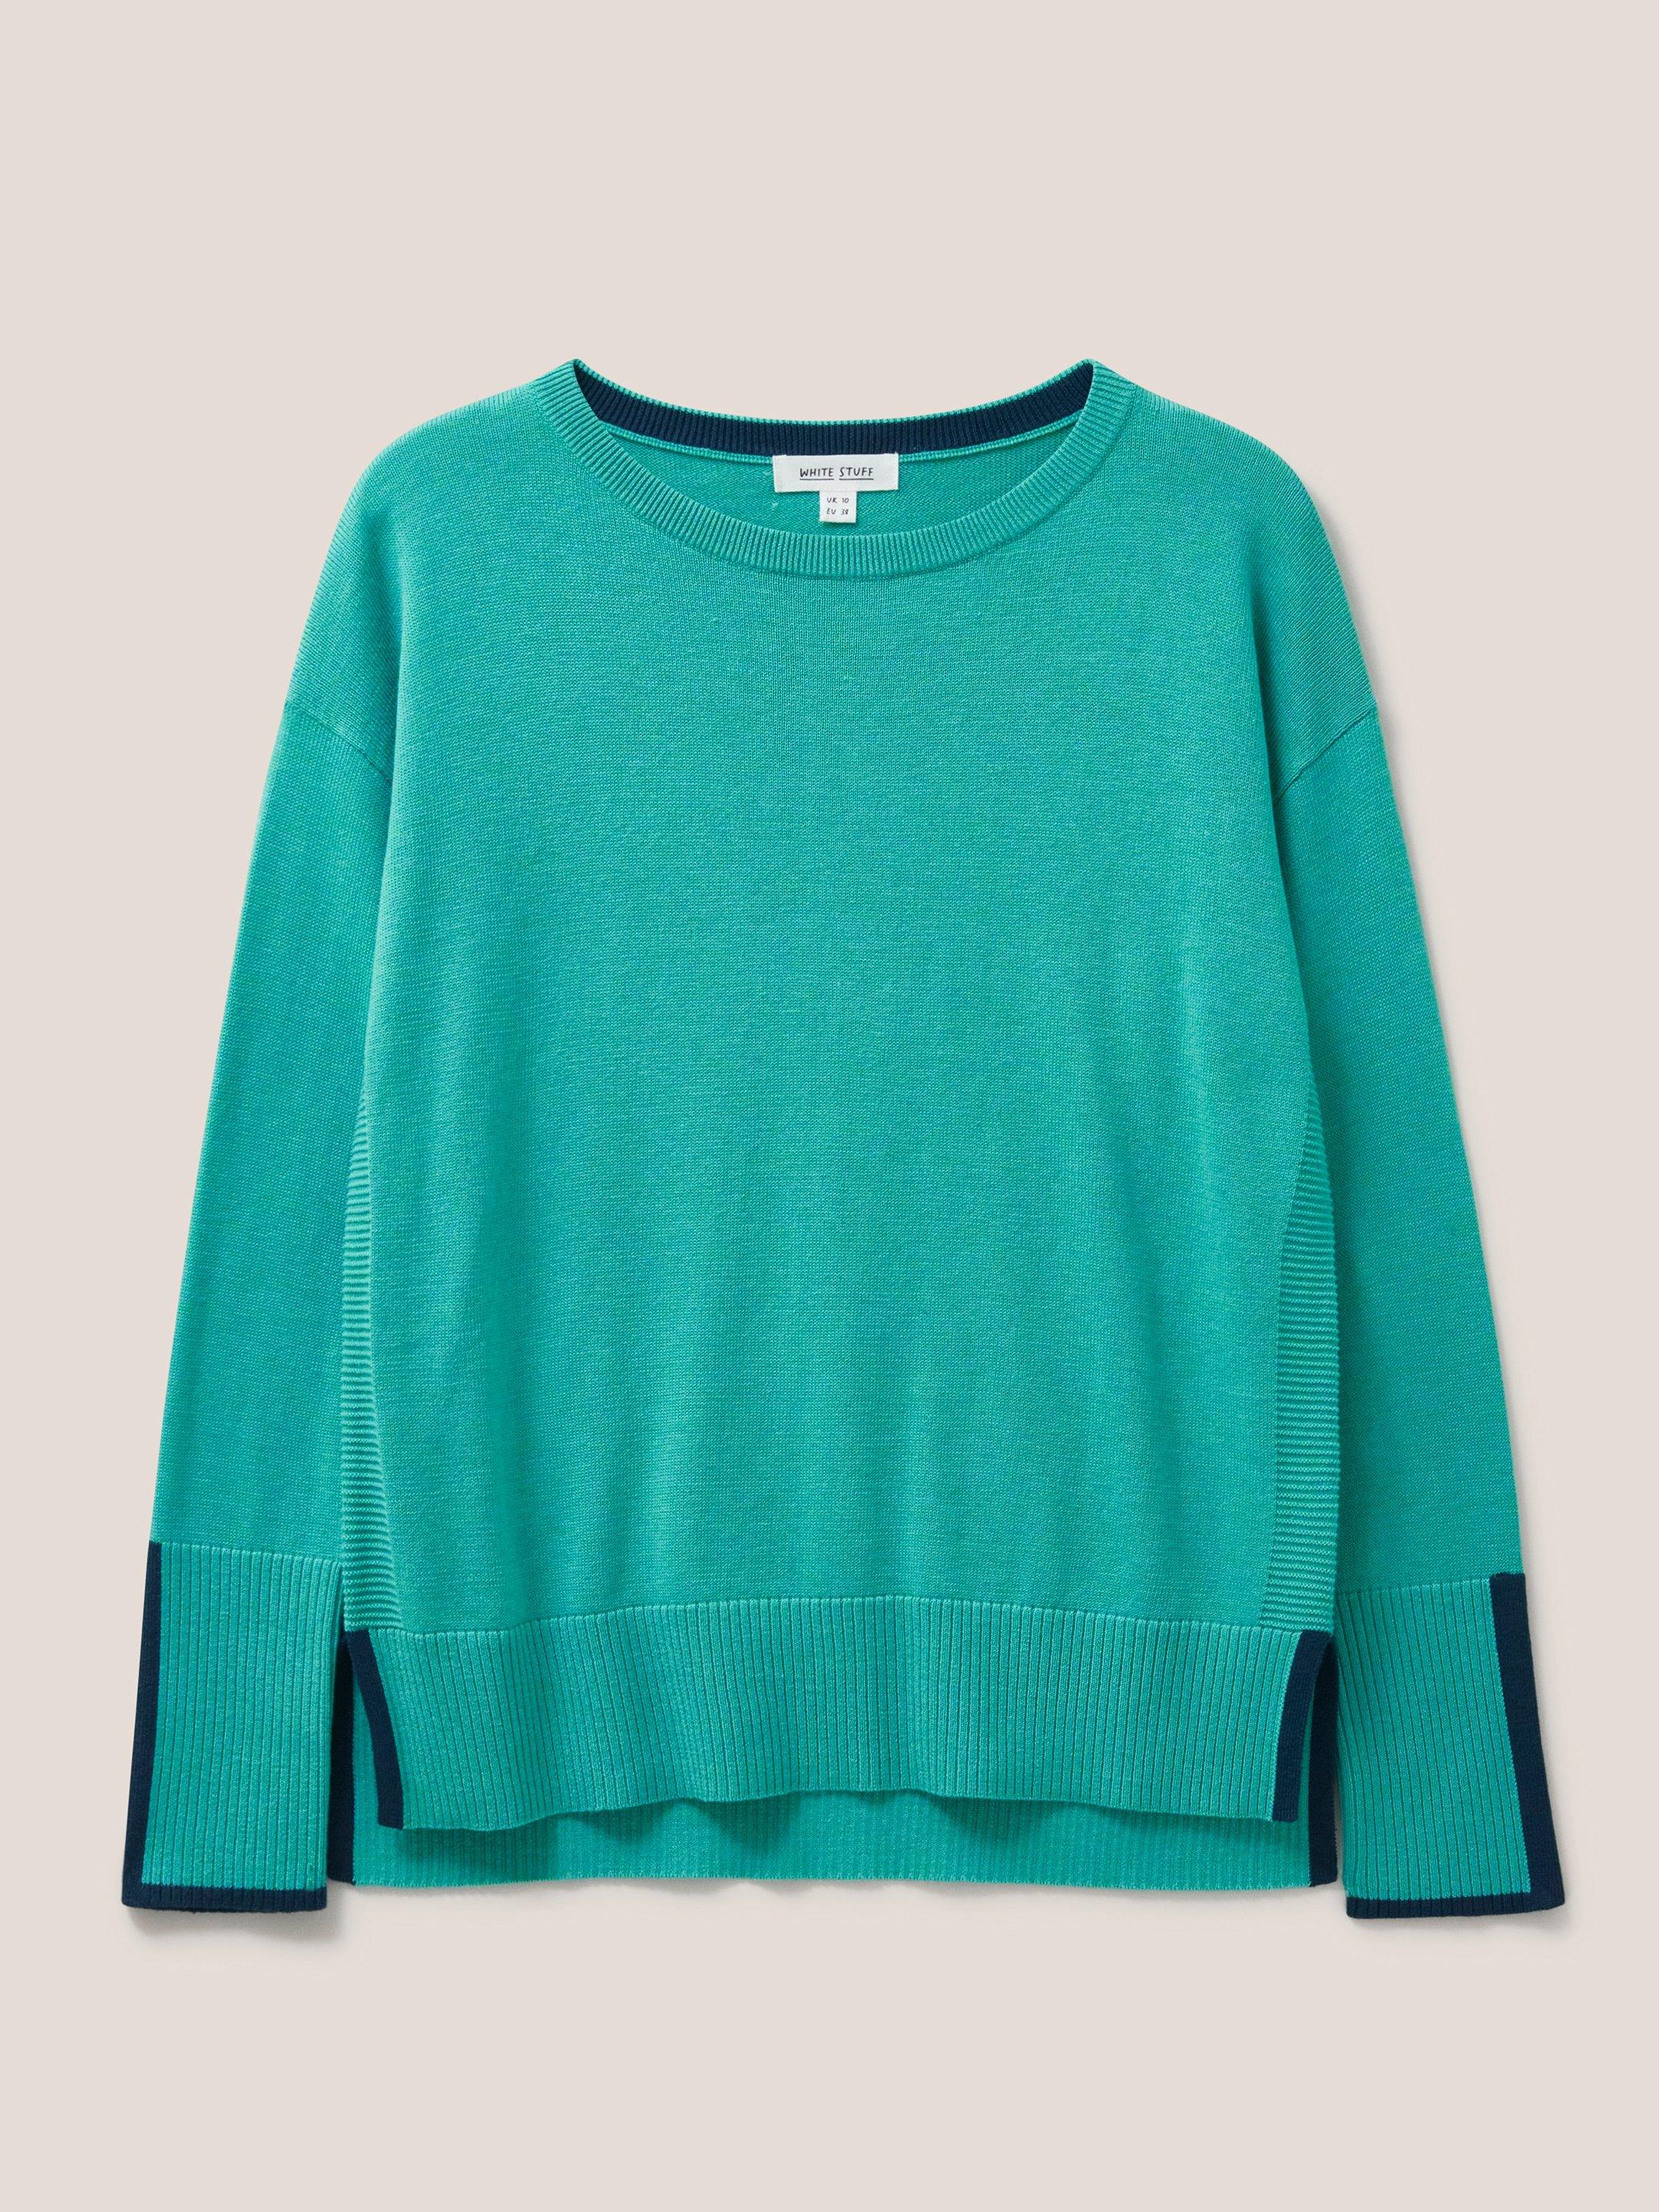 Olive Knitted Jumper in BRT BLUE - FLAT FRONT